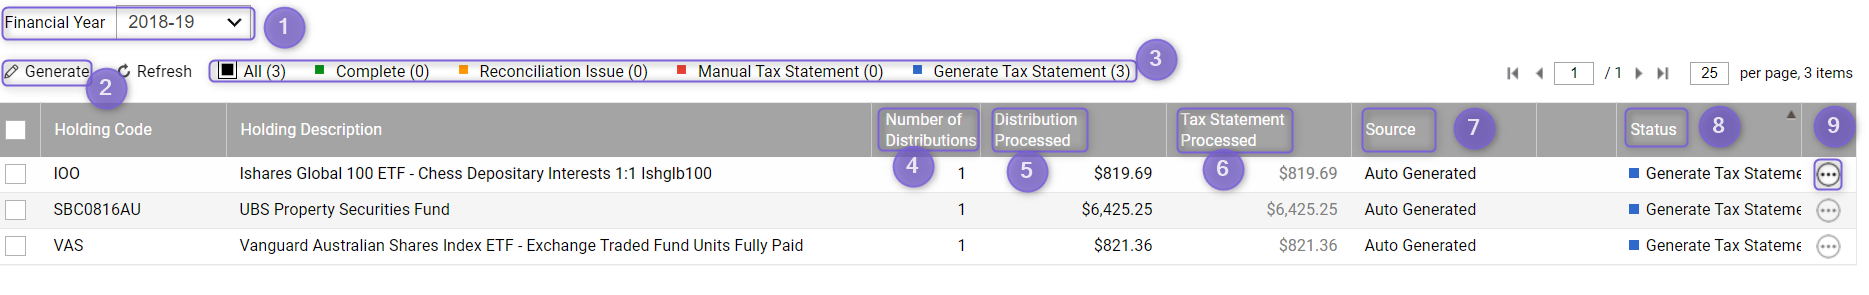 Tax_Statement_Console_Overview.png